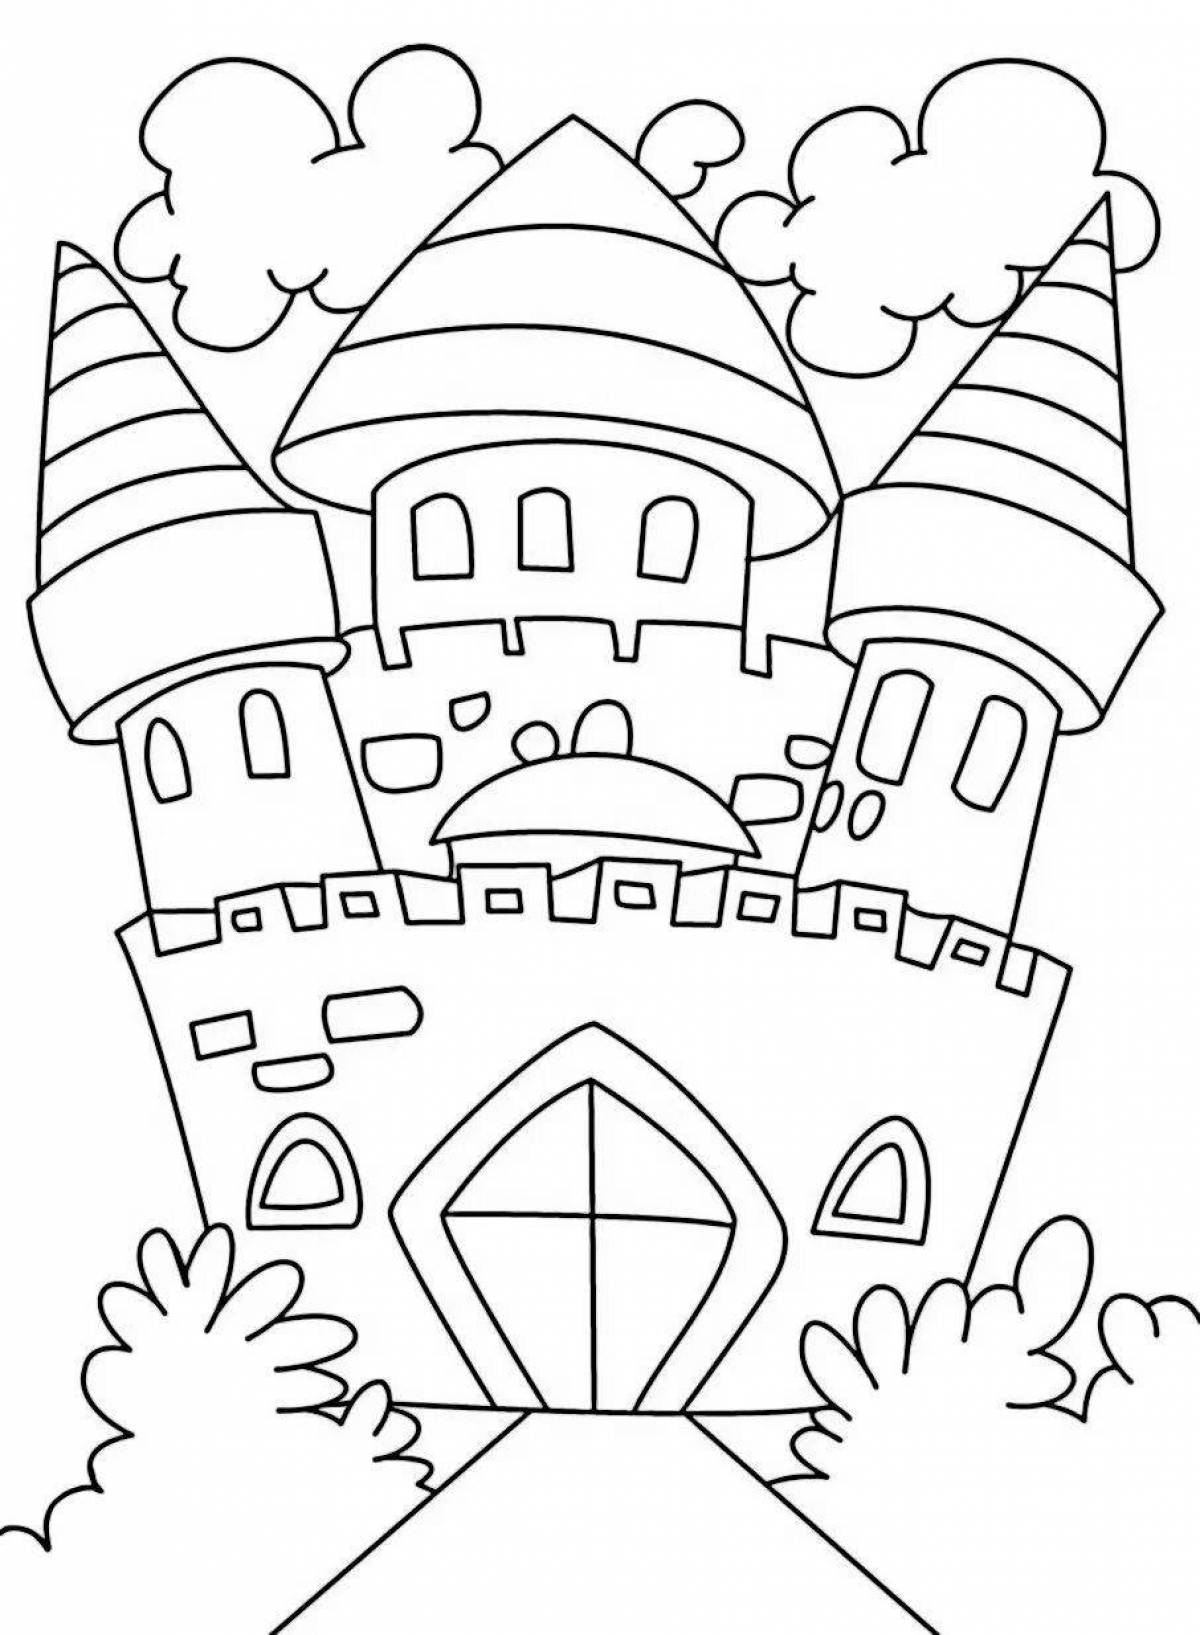 Coloring book magic palace for kids